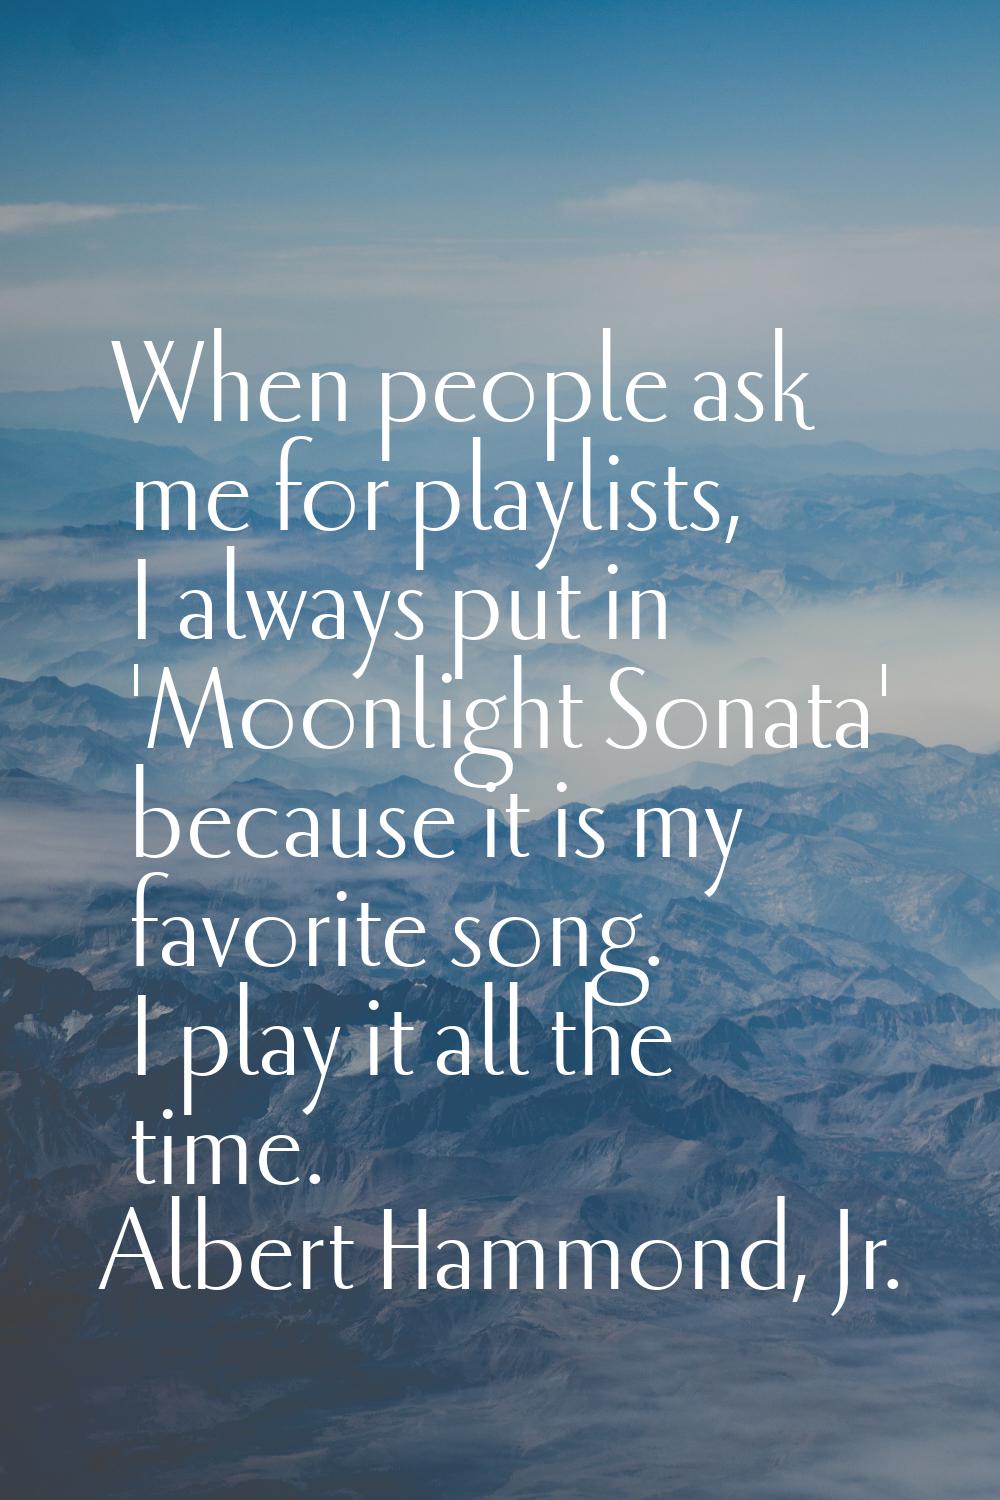 When people ask me for playlists, I always put in 'Moonlight Sonata' because it is my favorite song